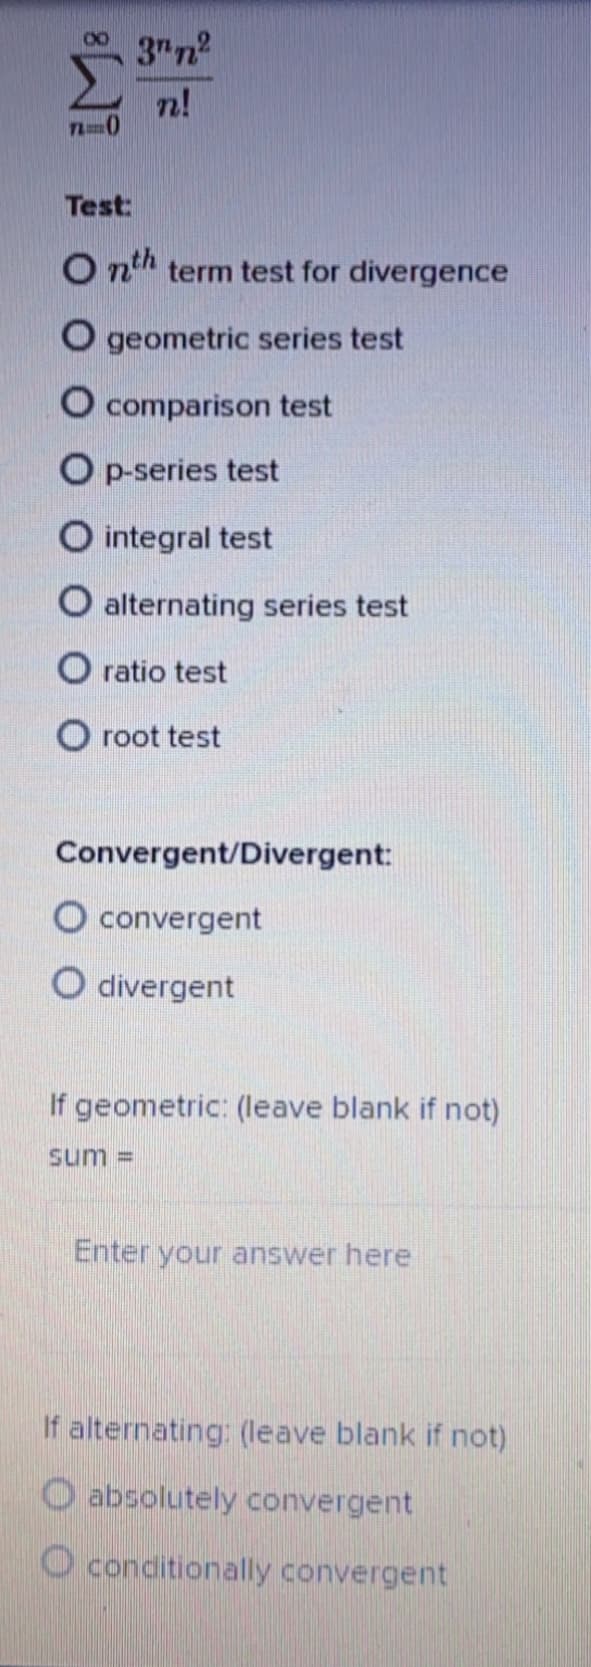 3"n
n!
Test:
O nth term test for divergence
O geometric series test
O comparison test
O p-series test
integral test
O alternating series test
O ratio test
O root test
Convergent/Divergent:
O convergent
O divergent
If geometric: (leave blank if not)
sum =
Enter your answer here
If alternating: (Ileave blank if not)
absolutely convergent
O conditionally convergent
